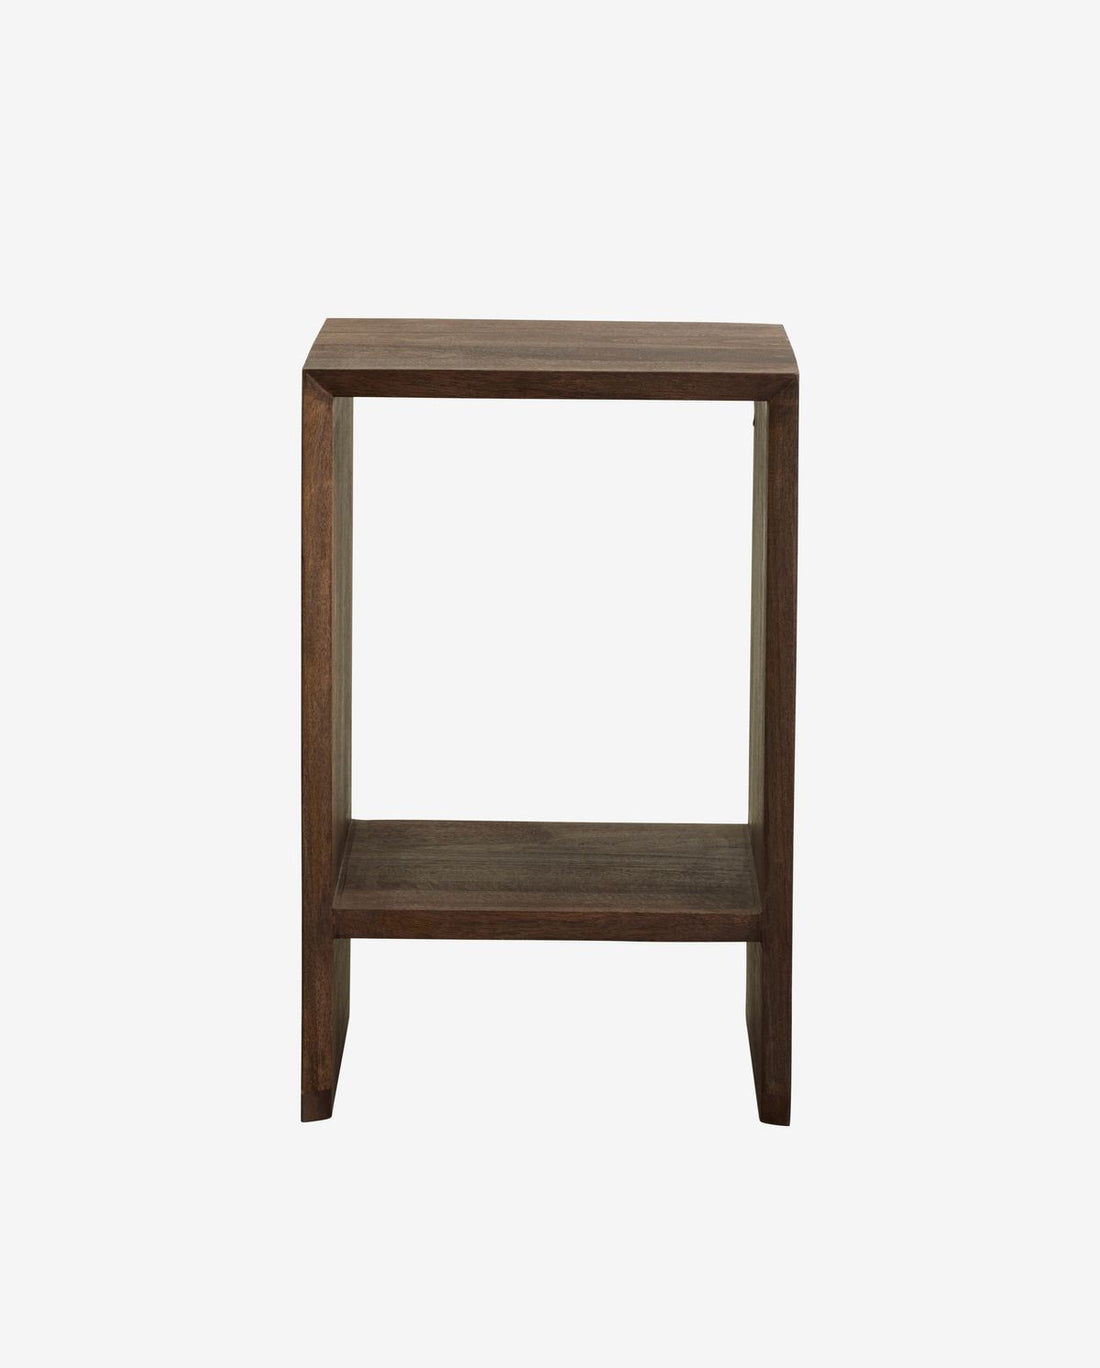 Nordal A/S NAPO NightStand/Tabela lateral - Marrom escuro